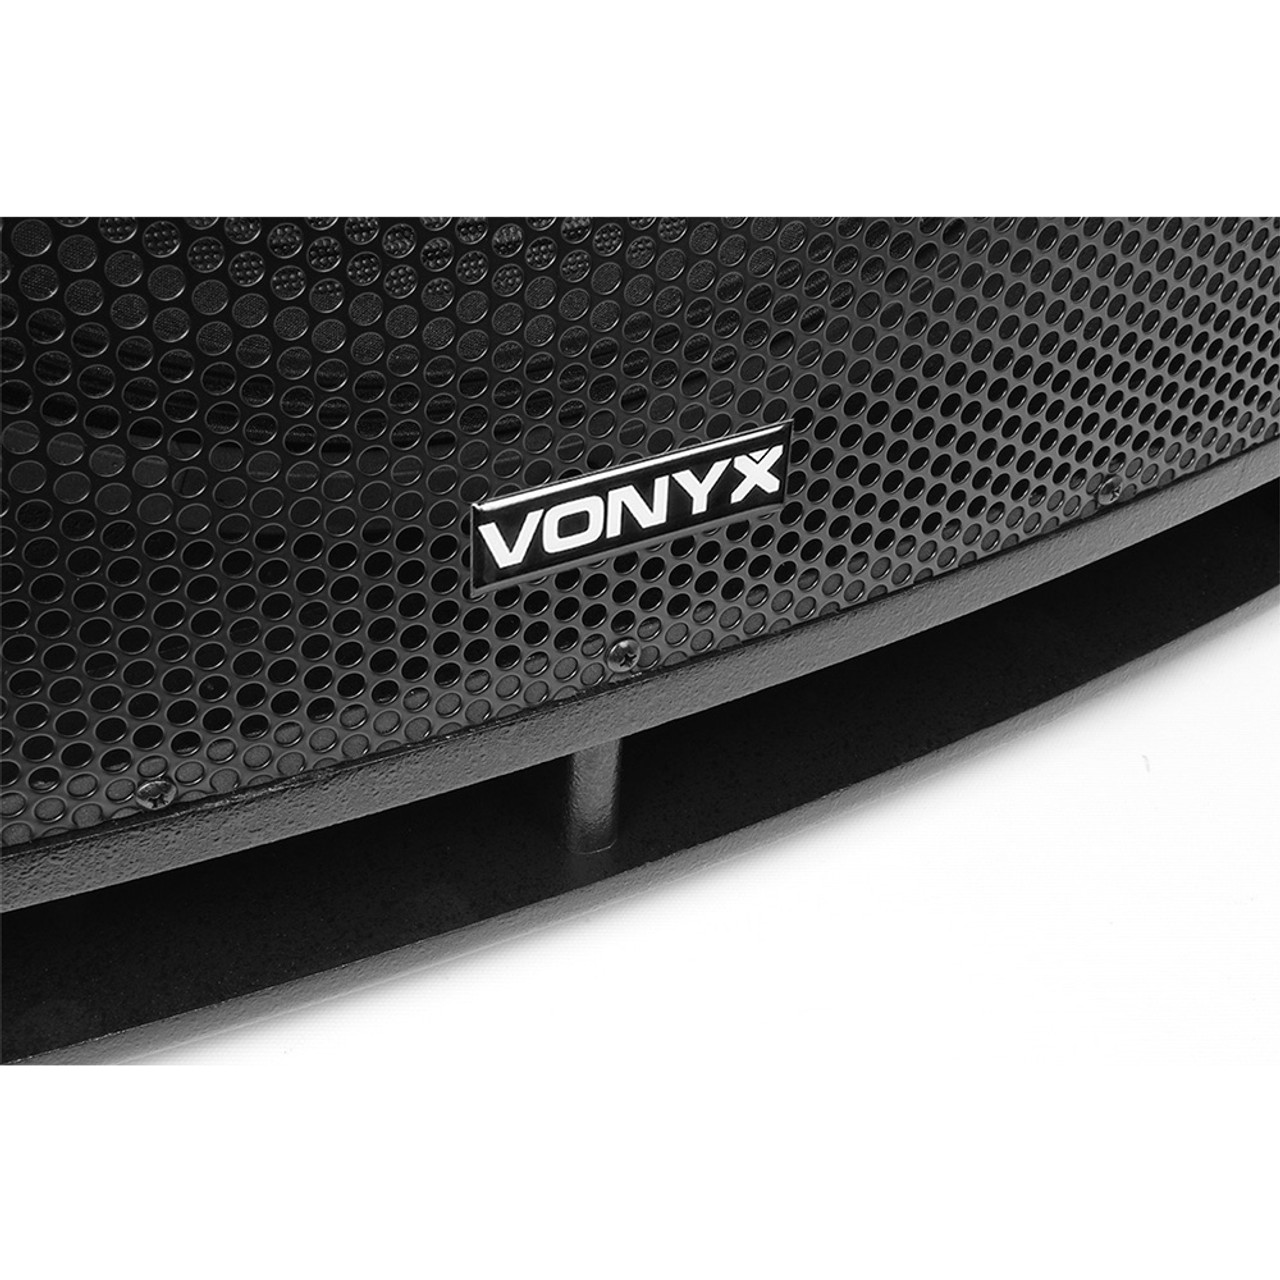 Vonyx SWP18 18" 1200W Powered PA Subwoofer